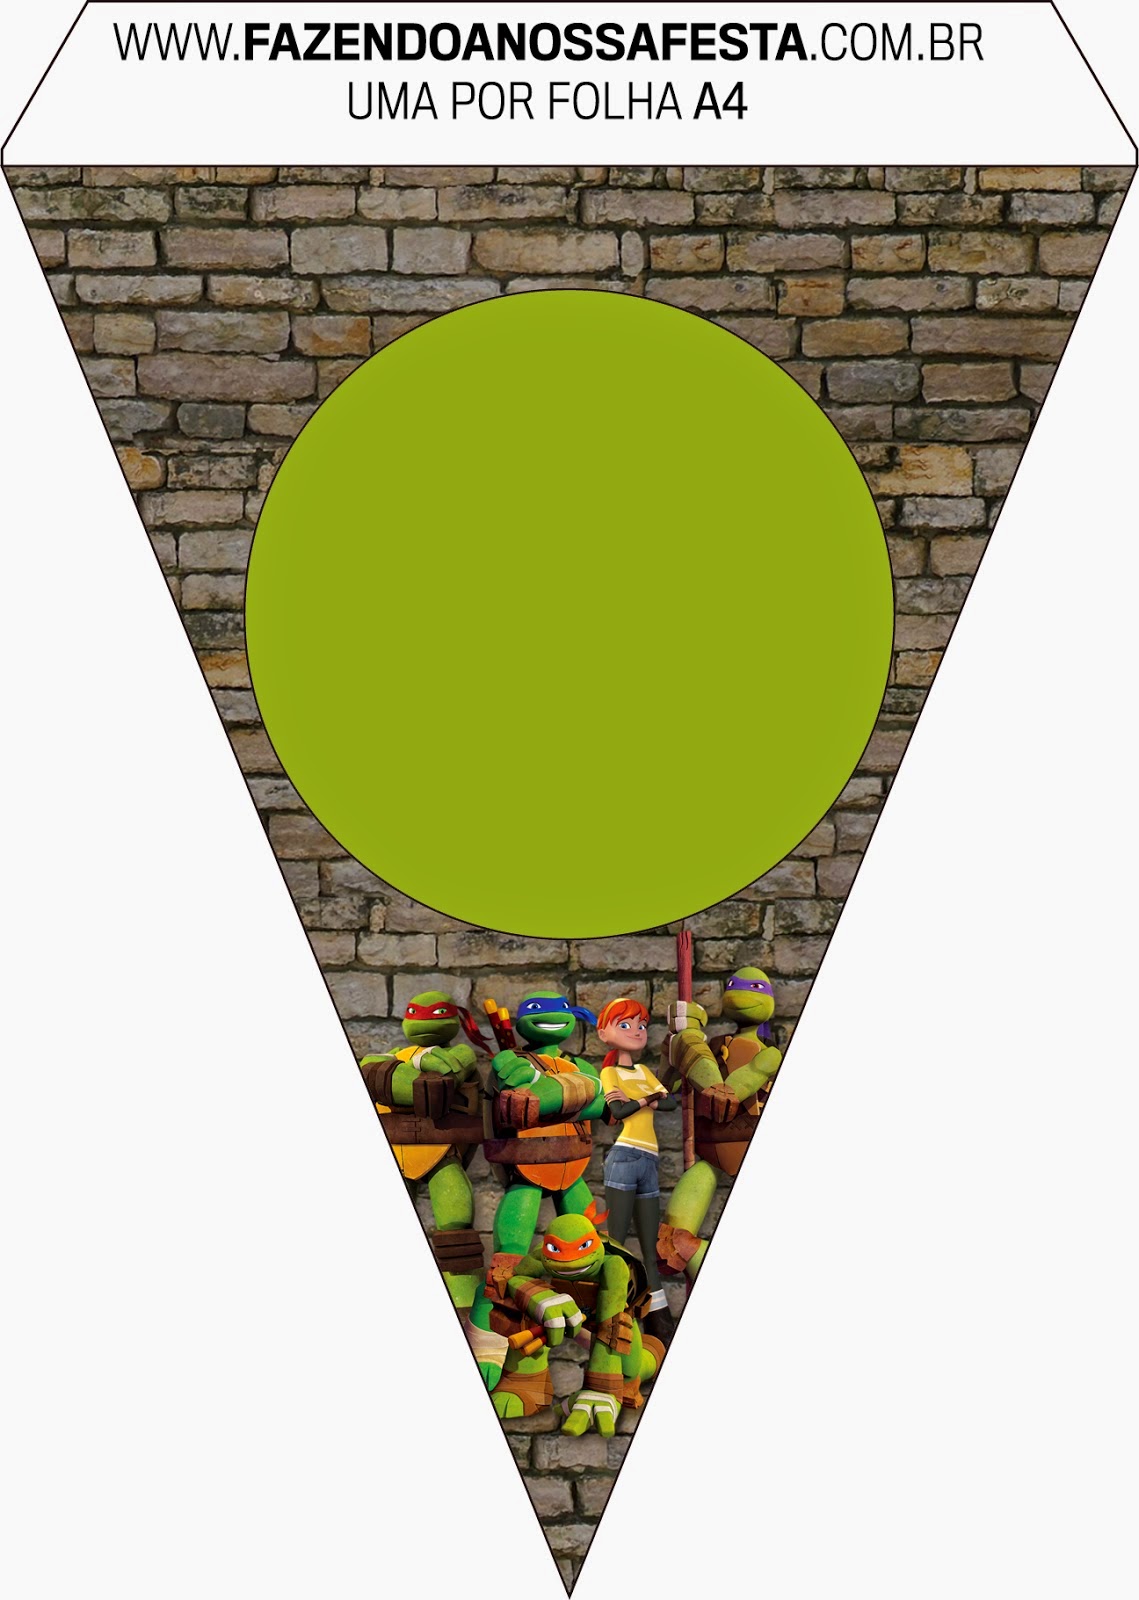 ninja-turtles-free-party-printables-and-invitations-is-it-for